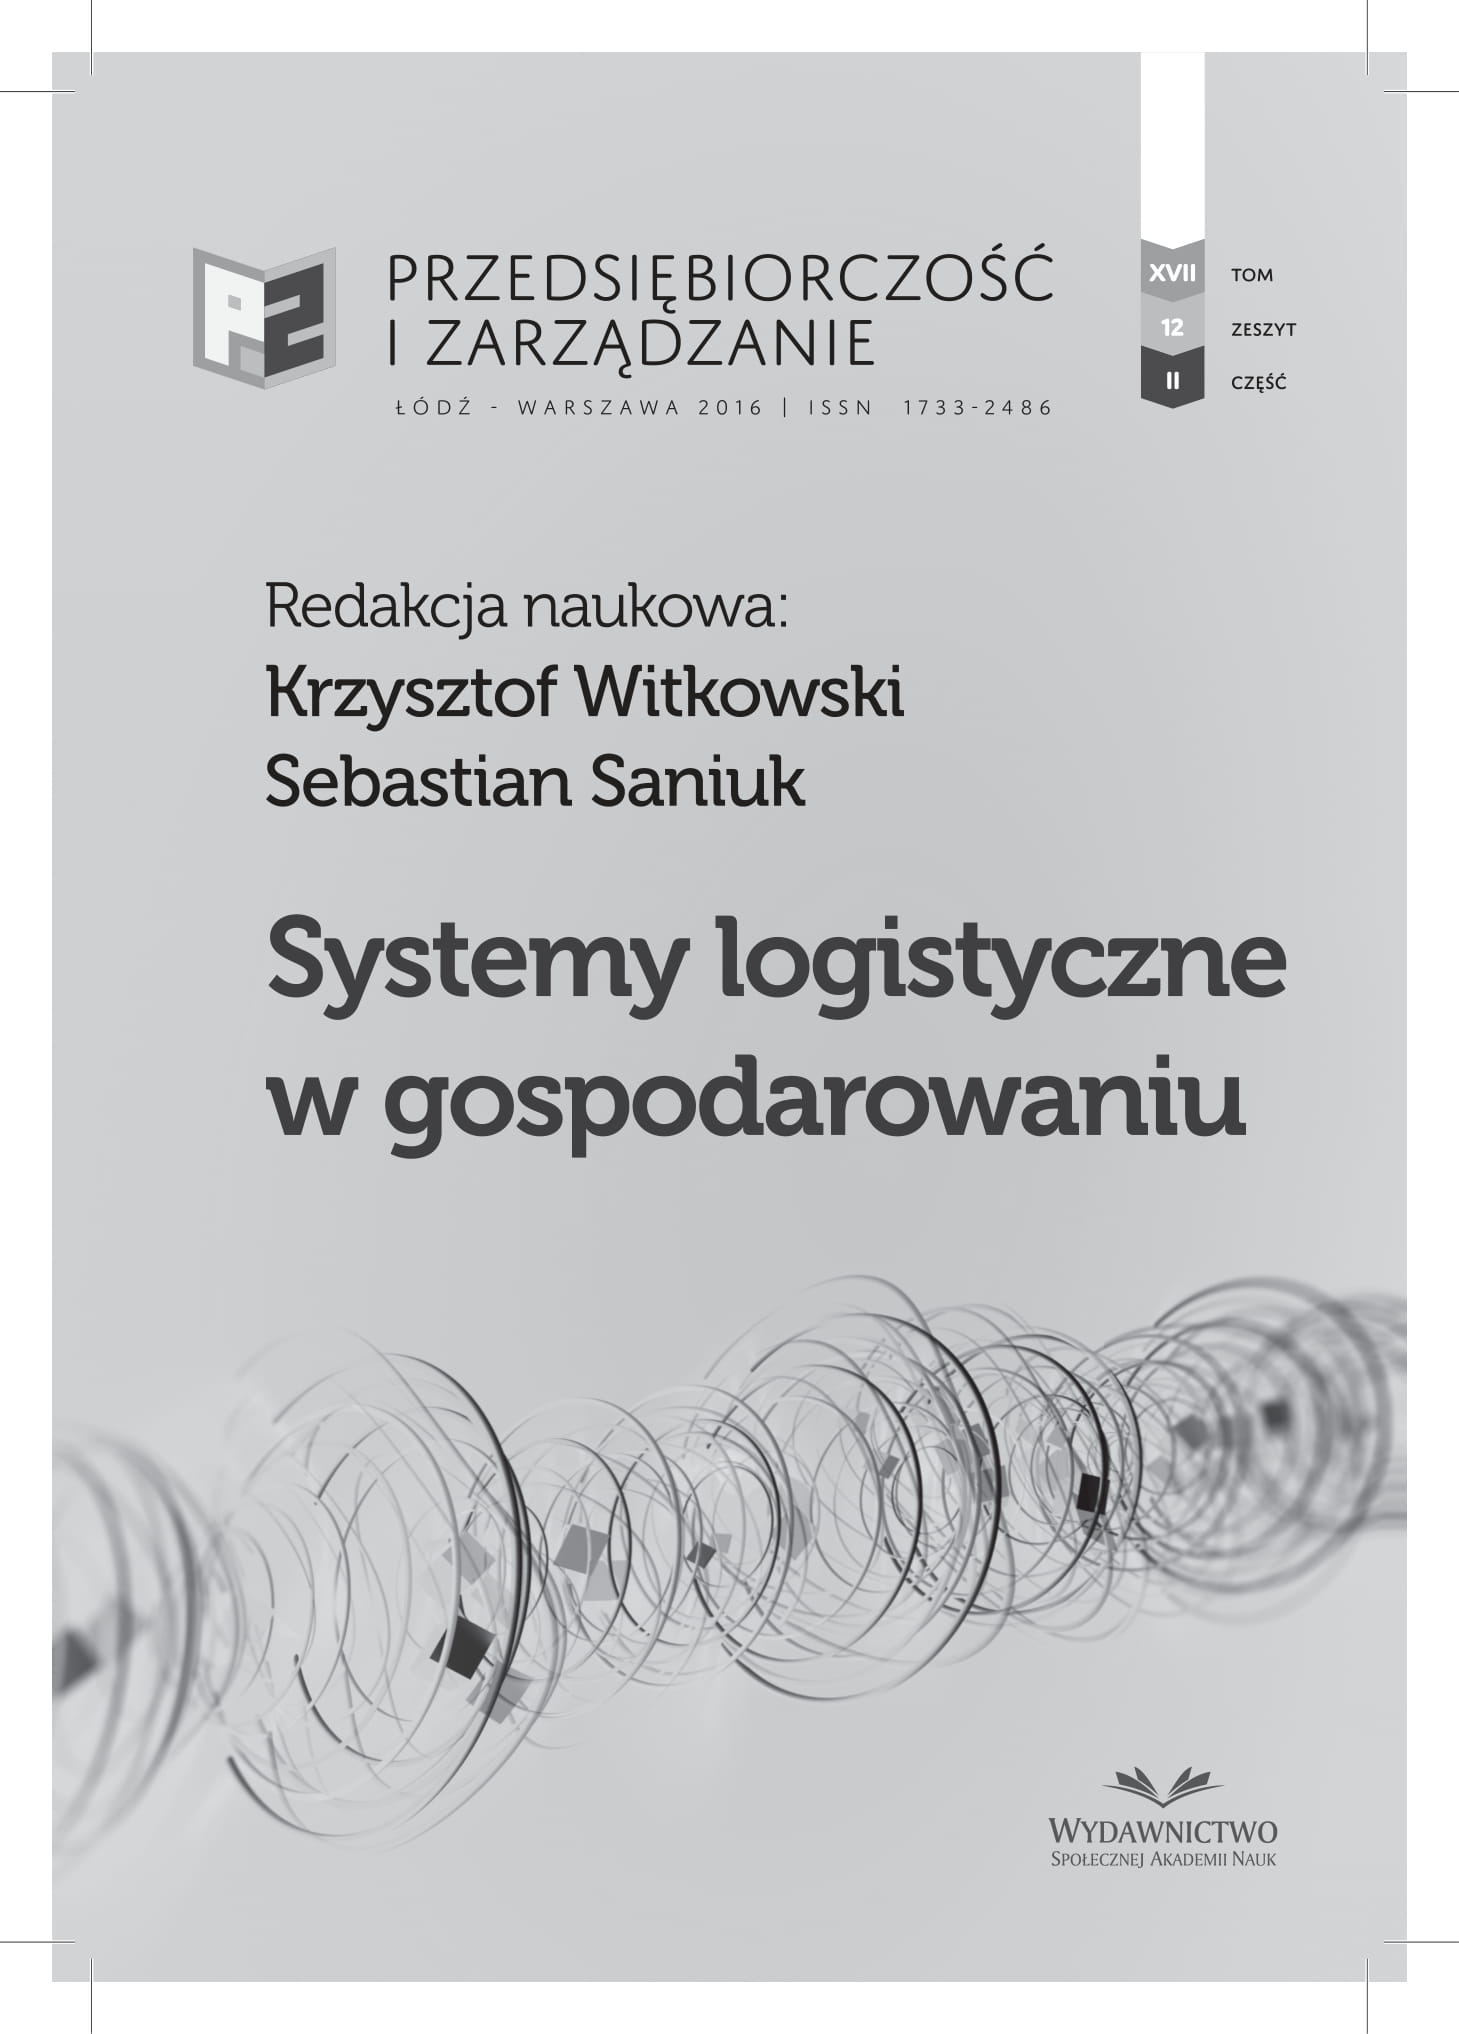 Warehouse Management System in the Light of Findings Cover Image